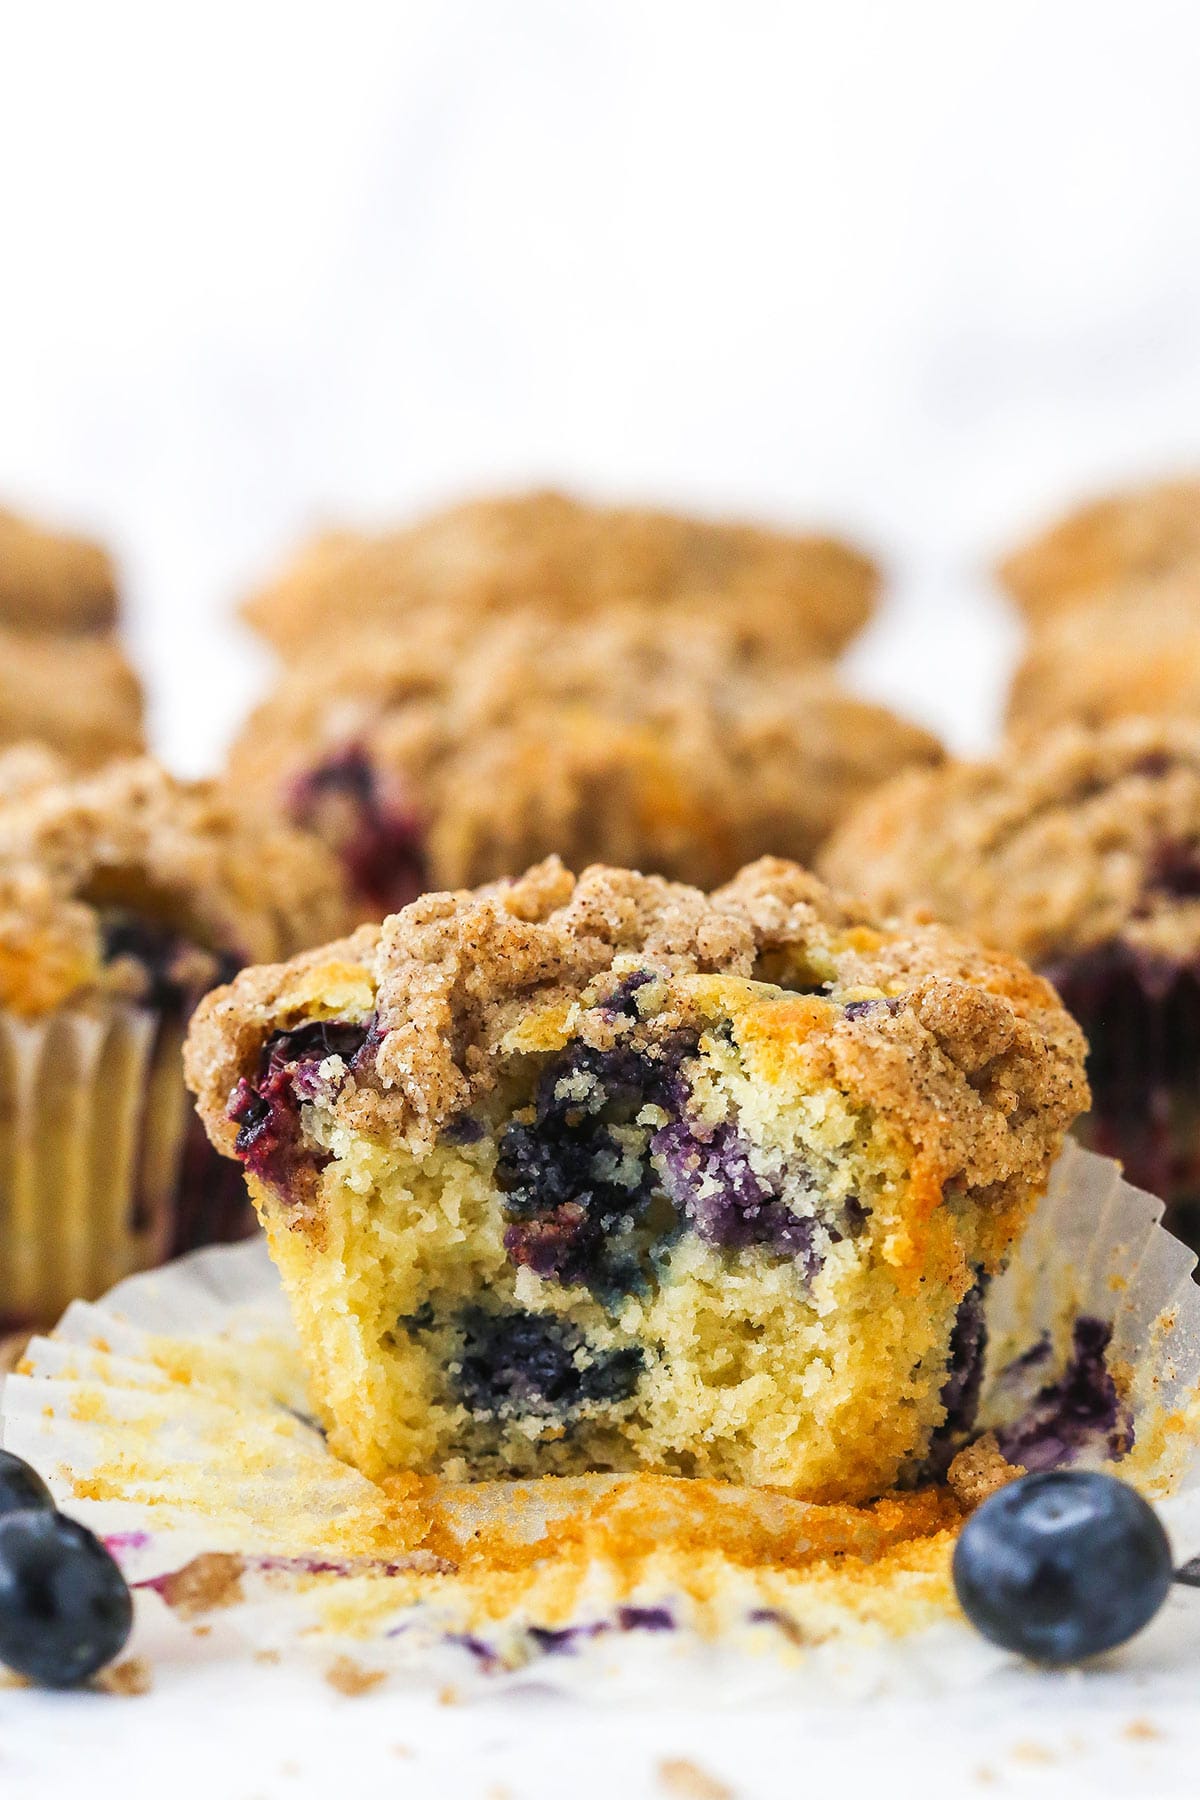 A blueberry muffin on a kitchen countertop with more muffins behind it